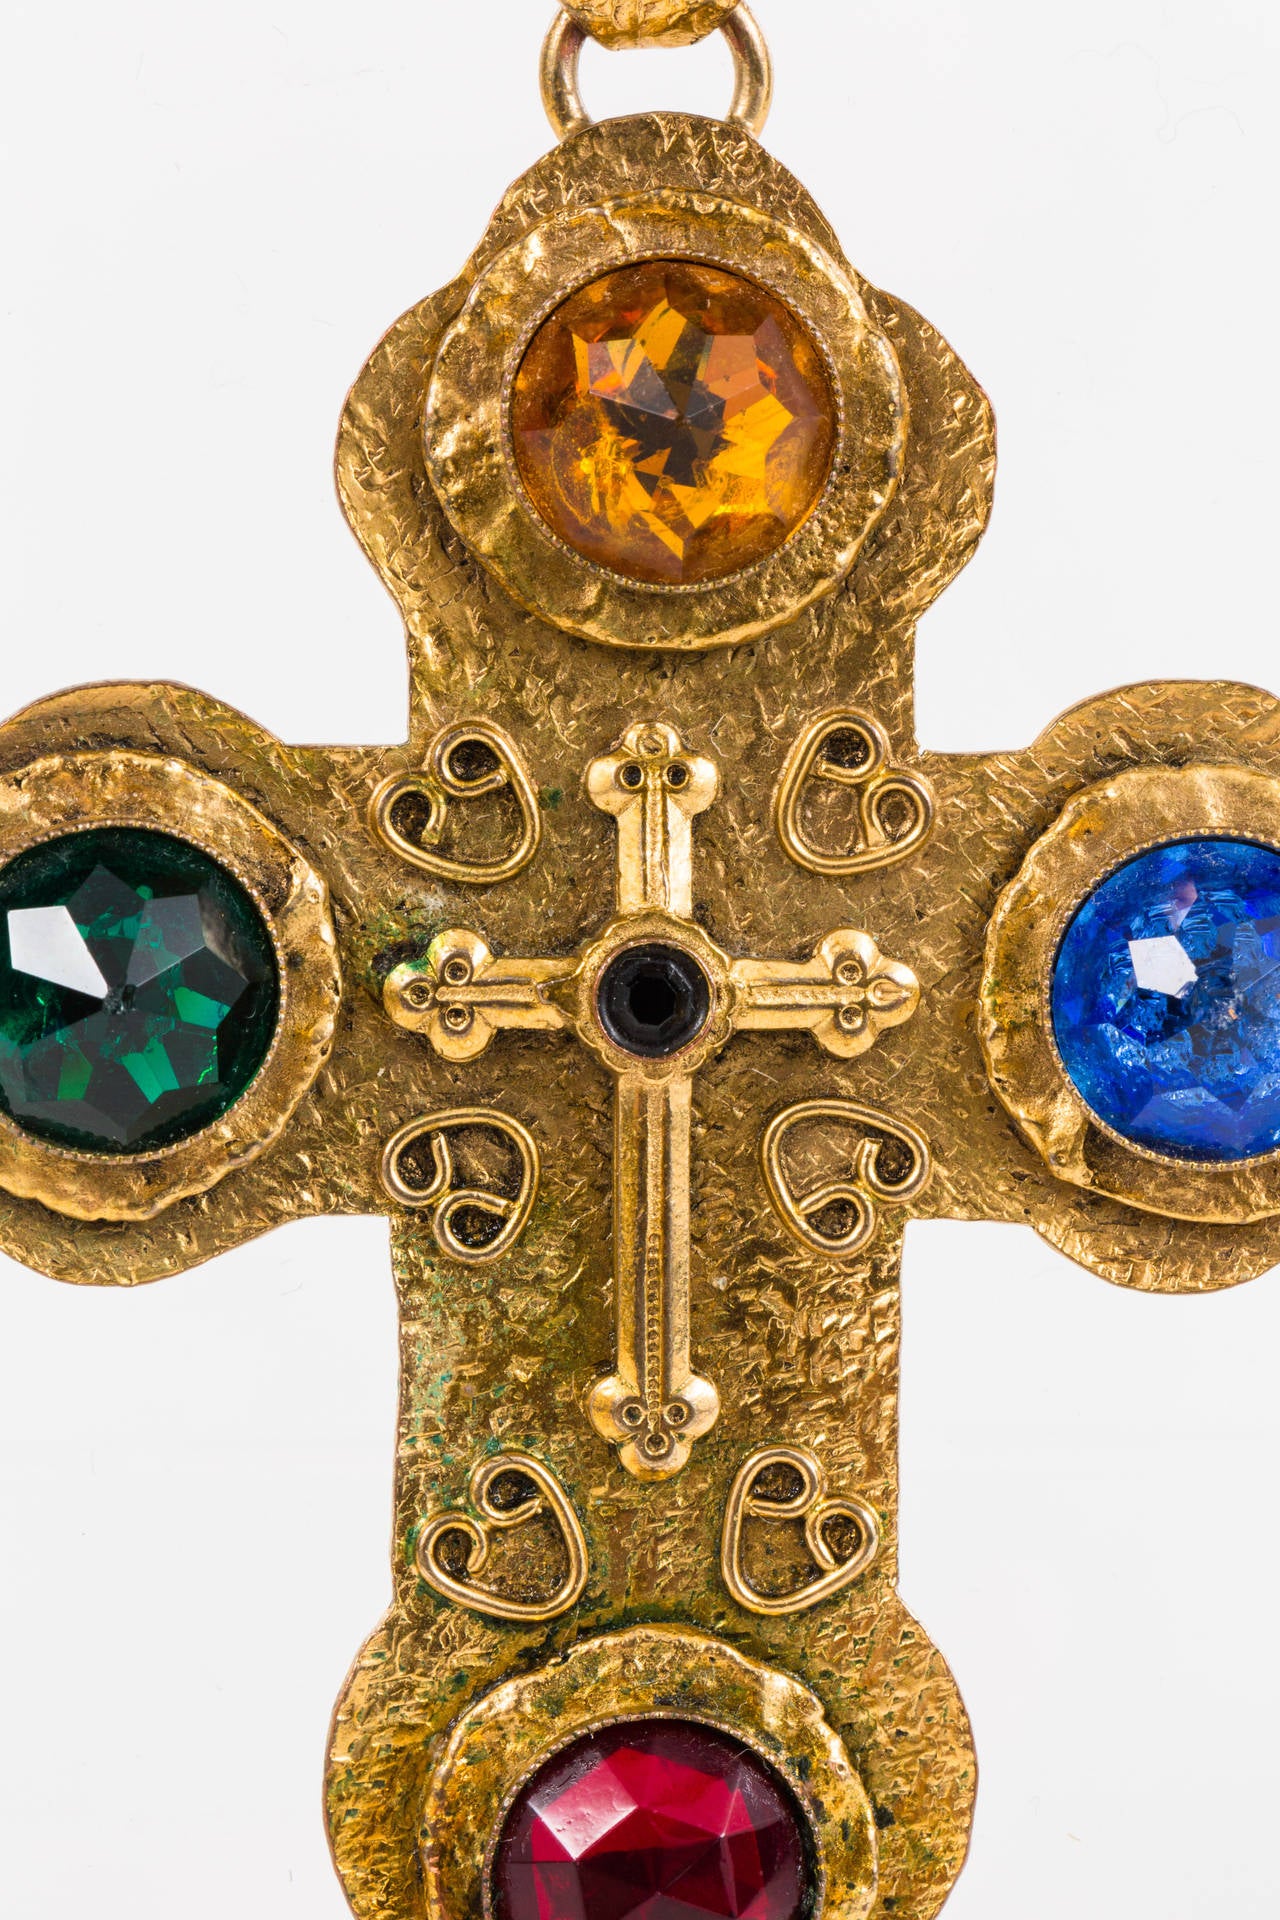 Excellent example of a piece by mid century Parisian costume jewelry designer, Henry. The designer frequently utilized themes of fantasy and Neo-Romanticism. This large cross is made of gilt metal with faceted glass faux gemstones. Pendant is